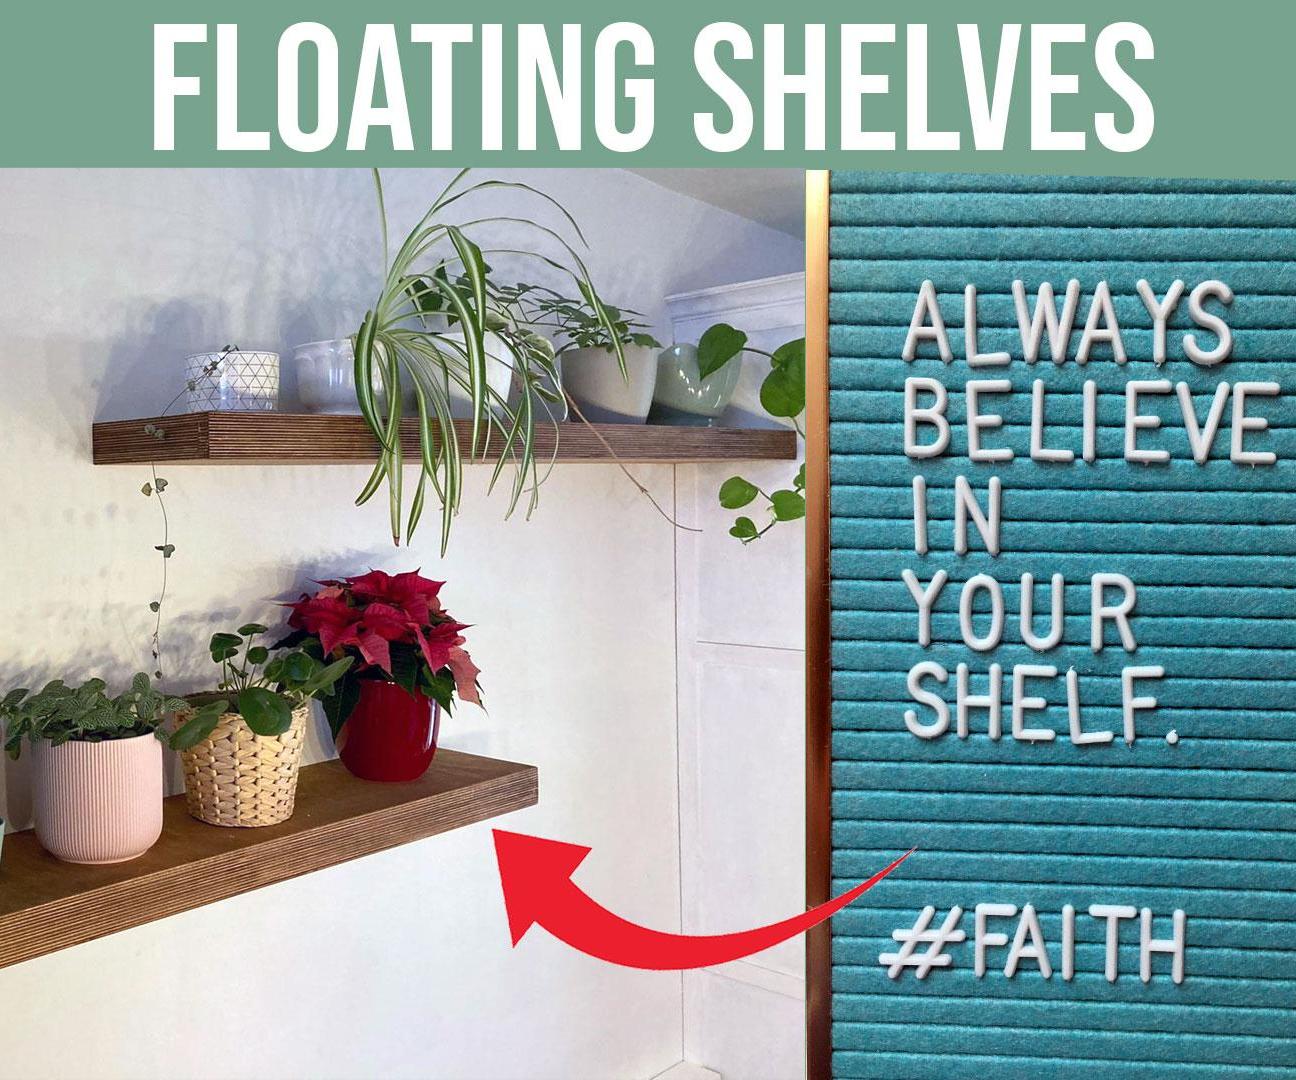 Believe in Your Shelf: Floating Plywood Shelves